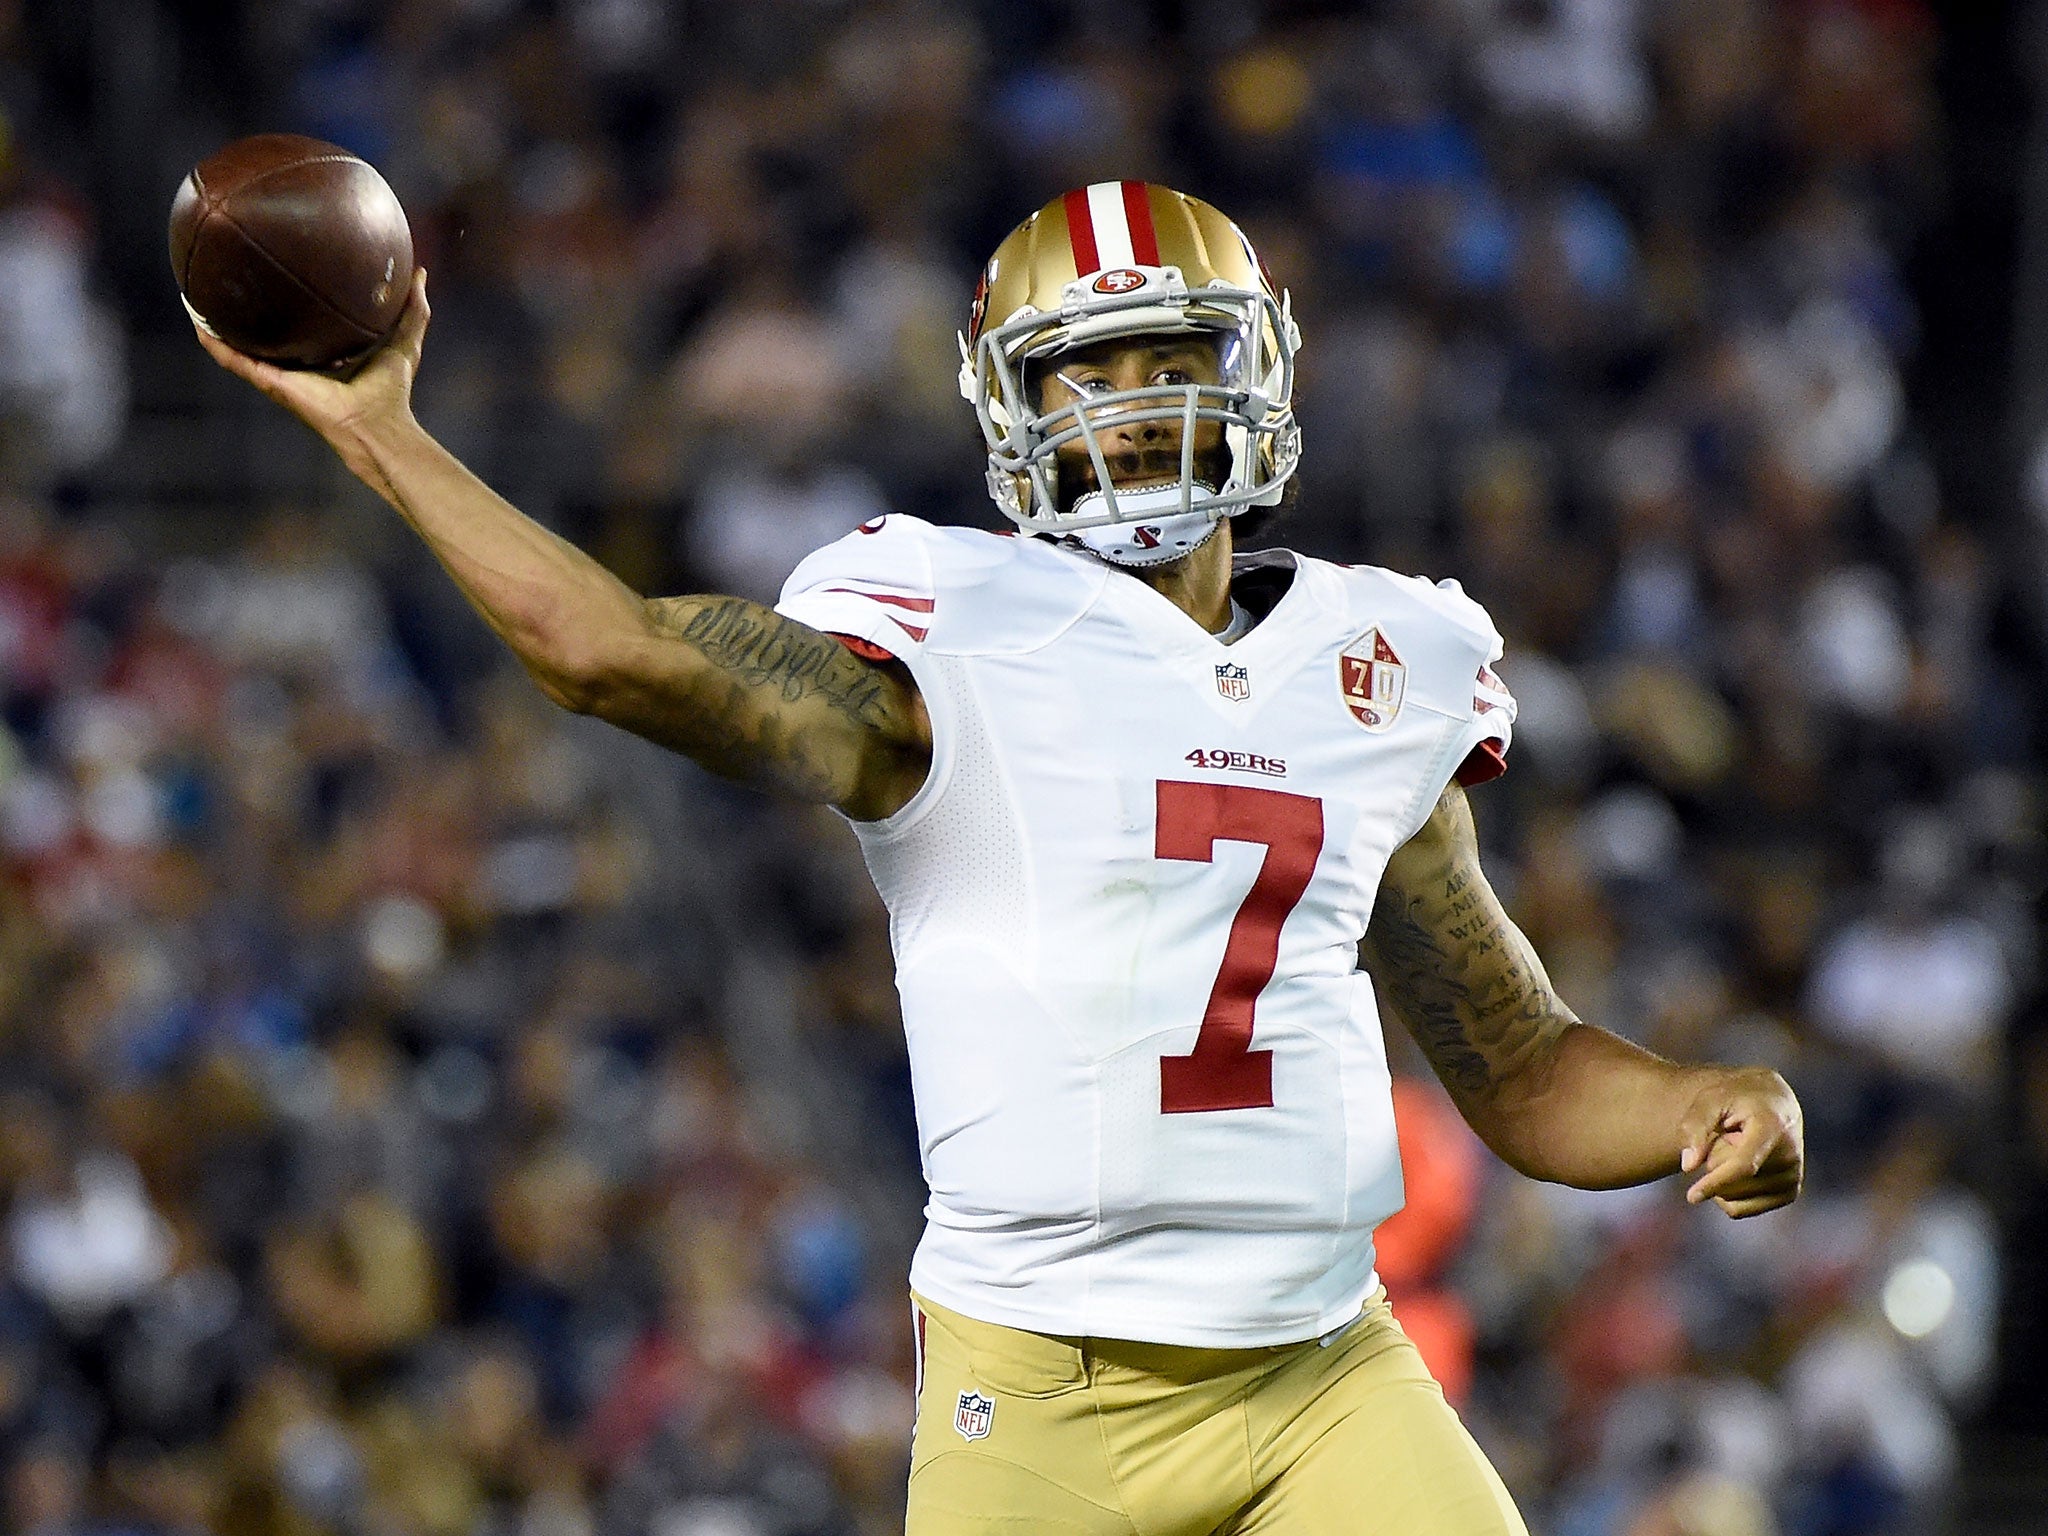 Colin Kaepernick has spoken out about police violence against the black people of America